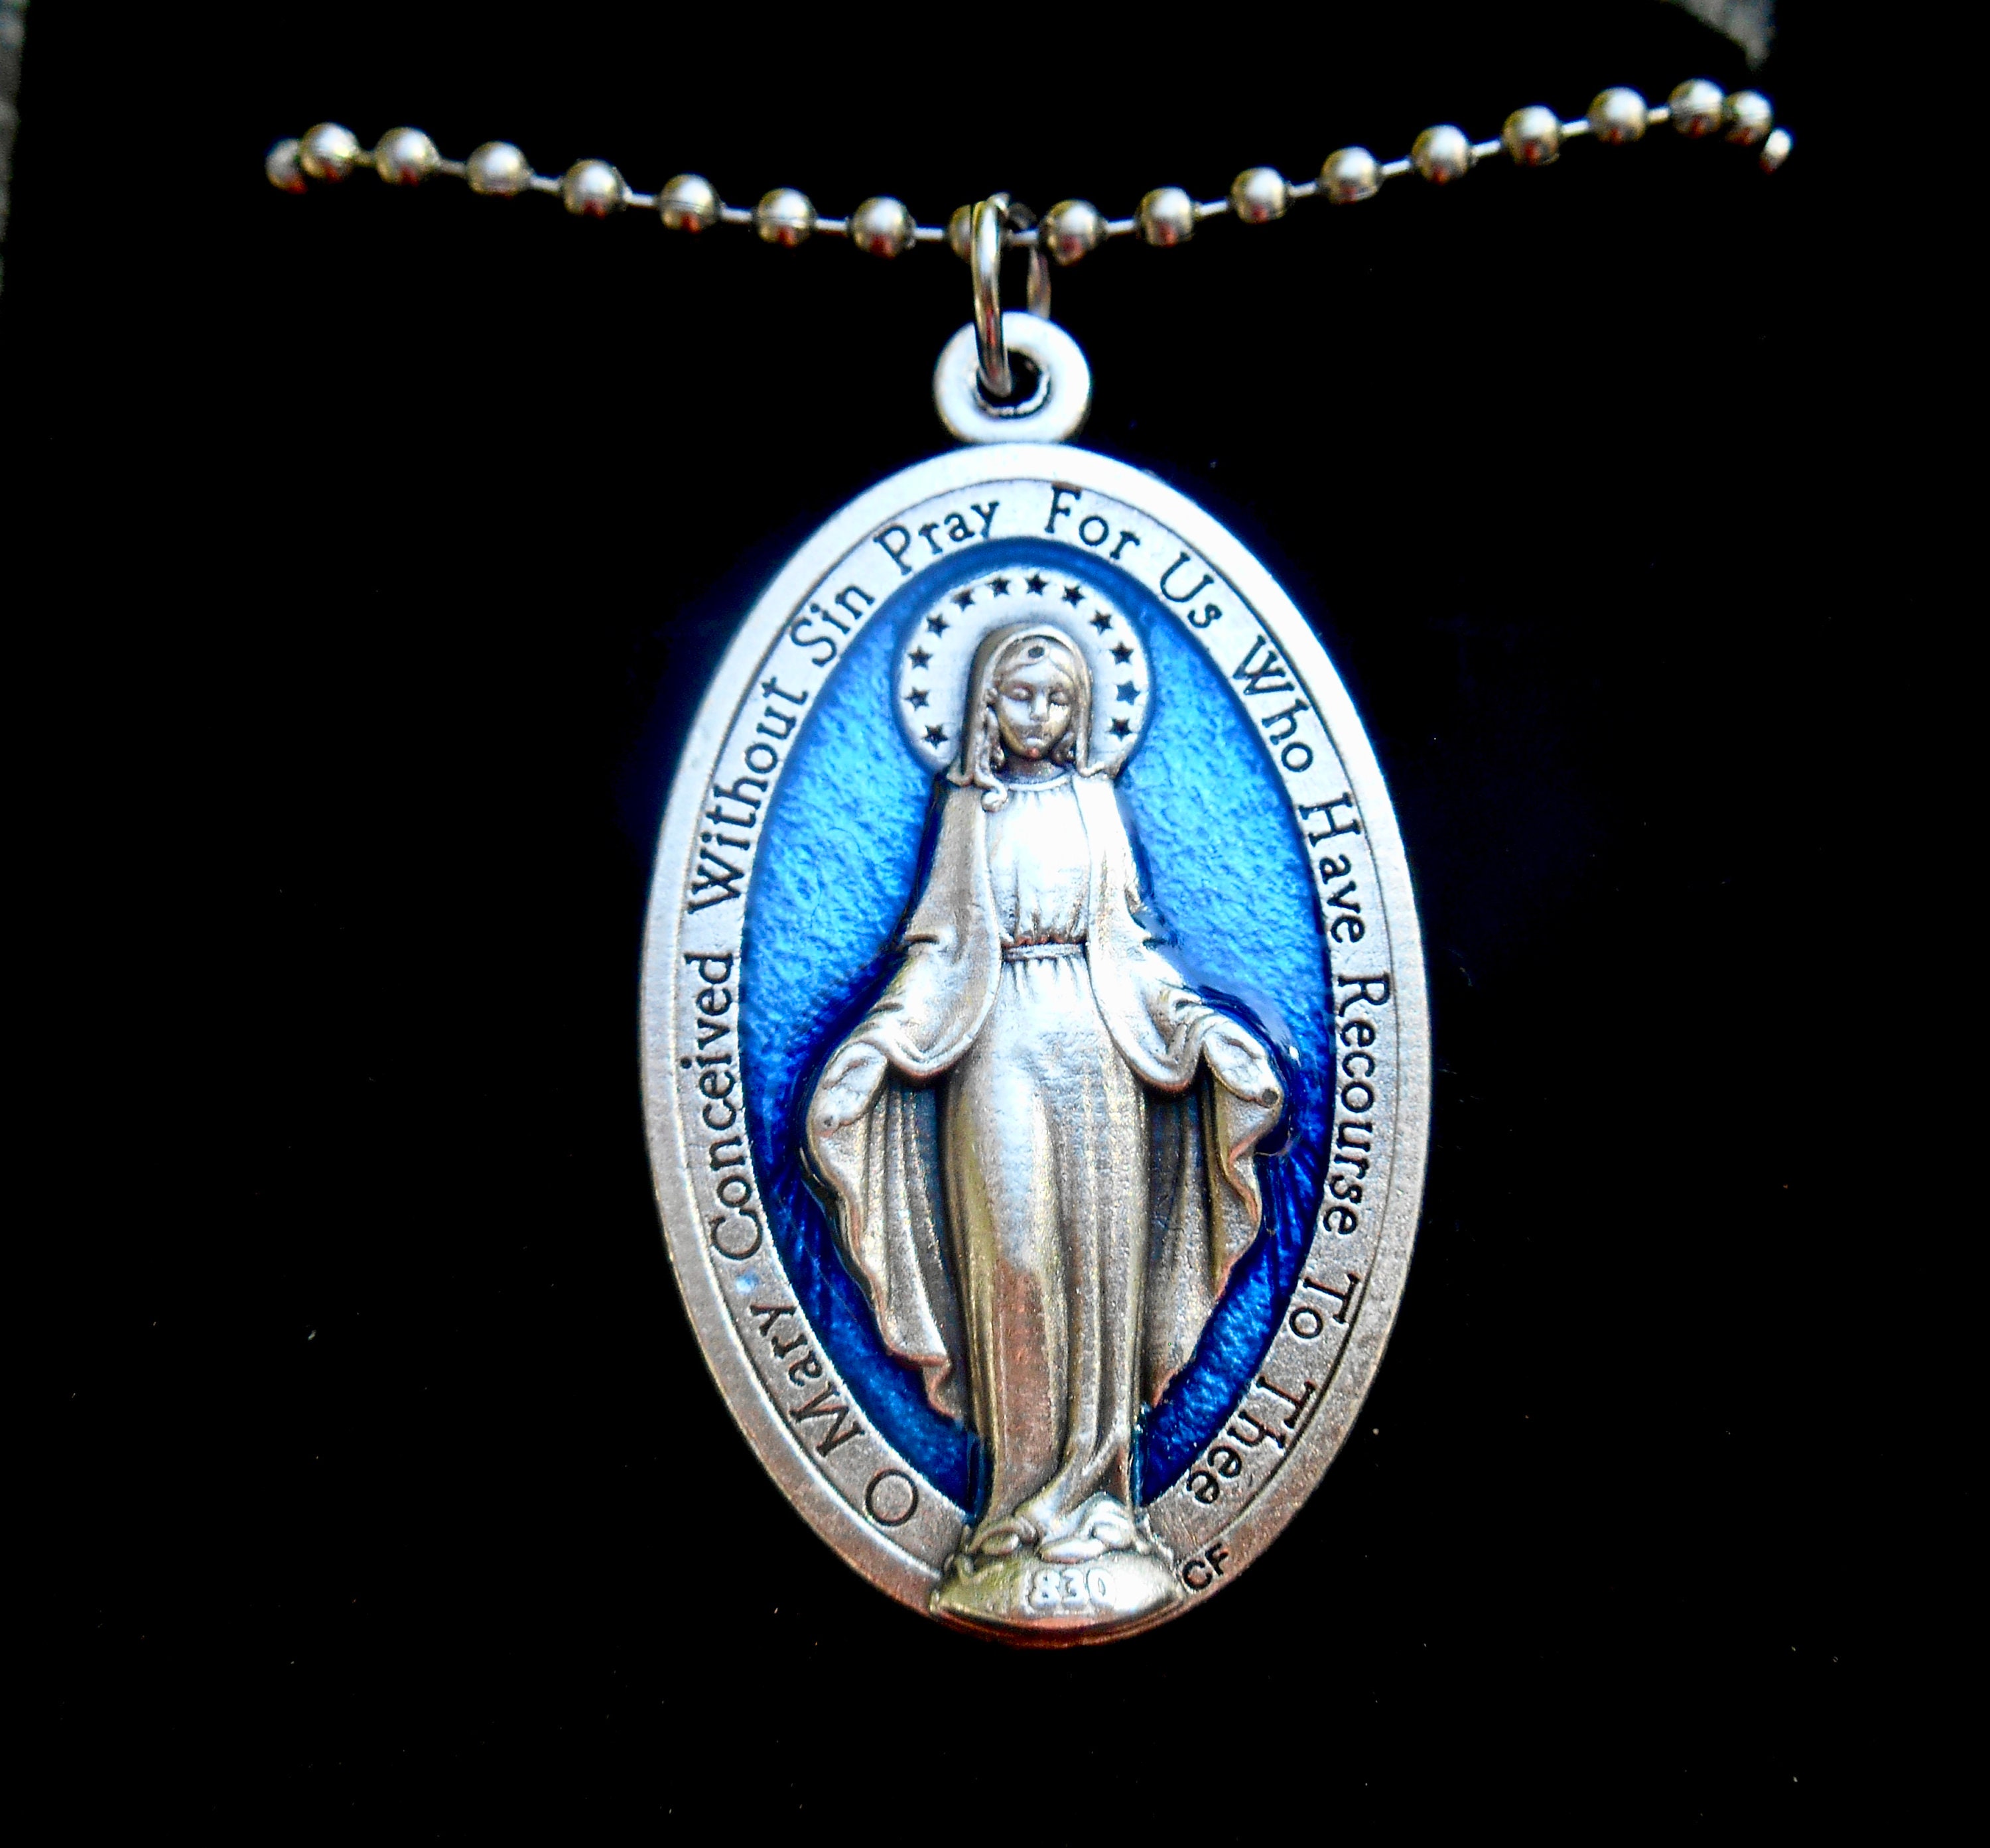 Bulk Pack of 5 - Miraculous Medal Pendant for Charm Bracelet or Necklace -  1 Inch Silver Oxidized with Blue Enamel Accent Miraculous Medals for